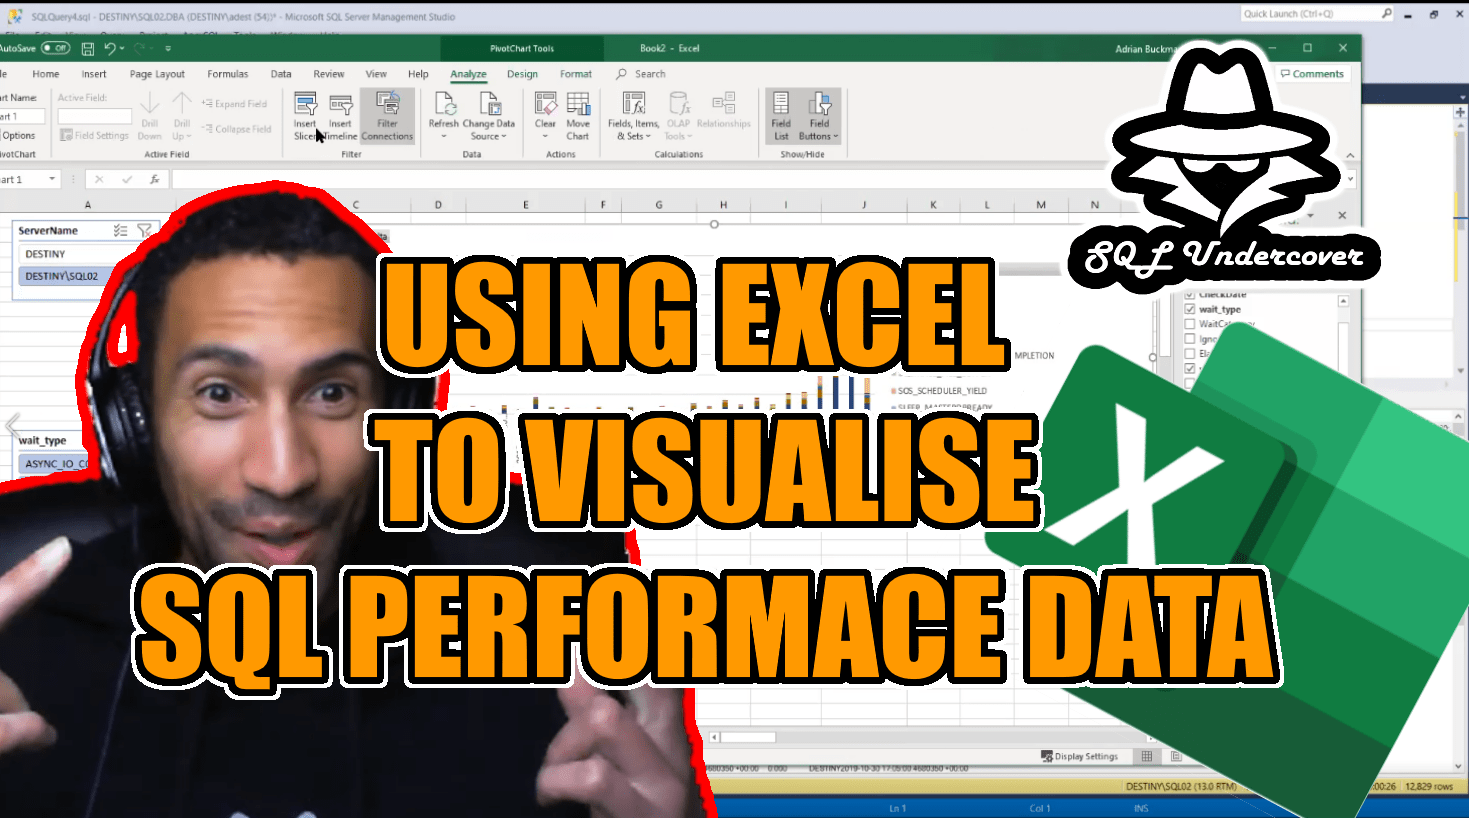 Using Excel to visualise SQL performance data